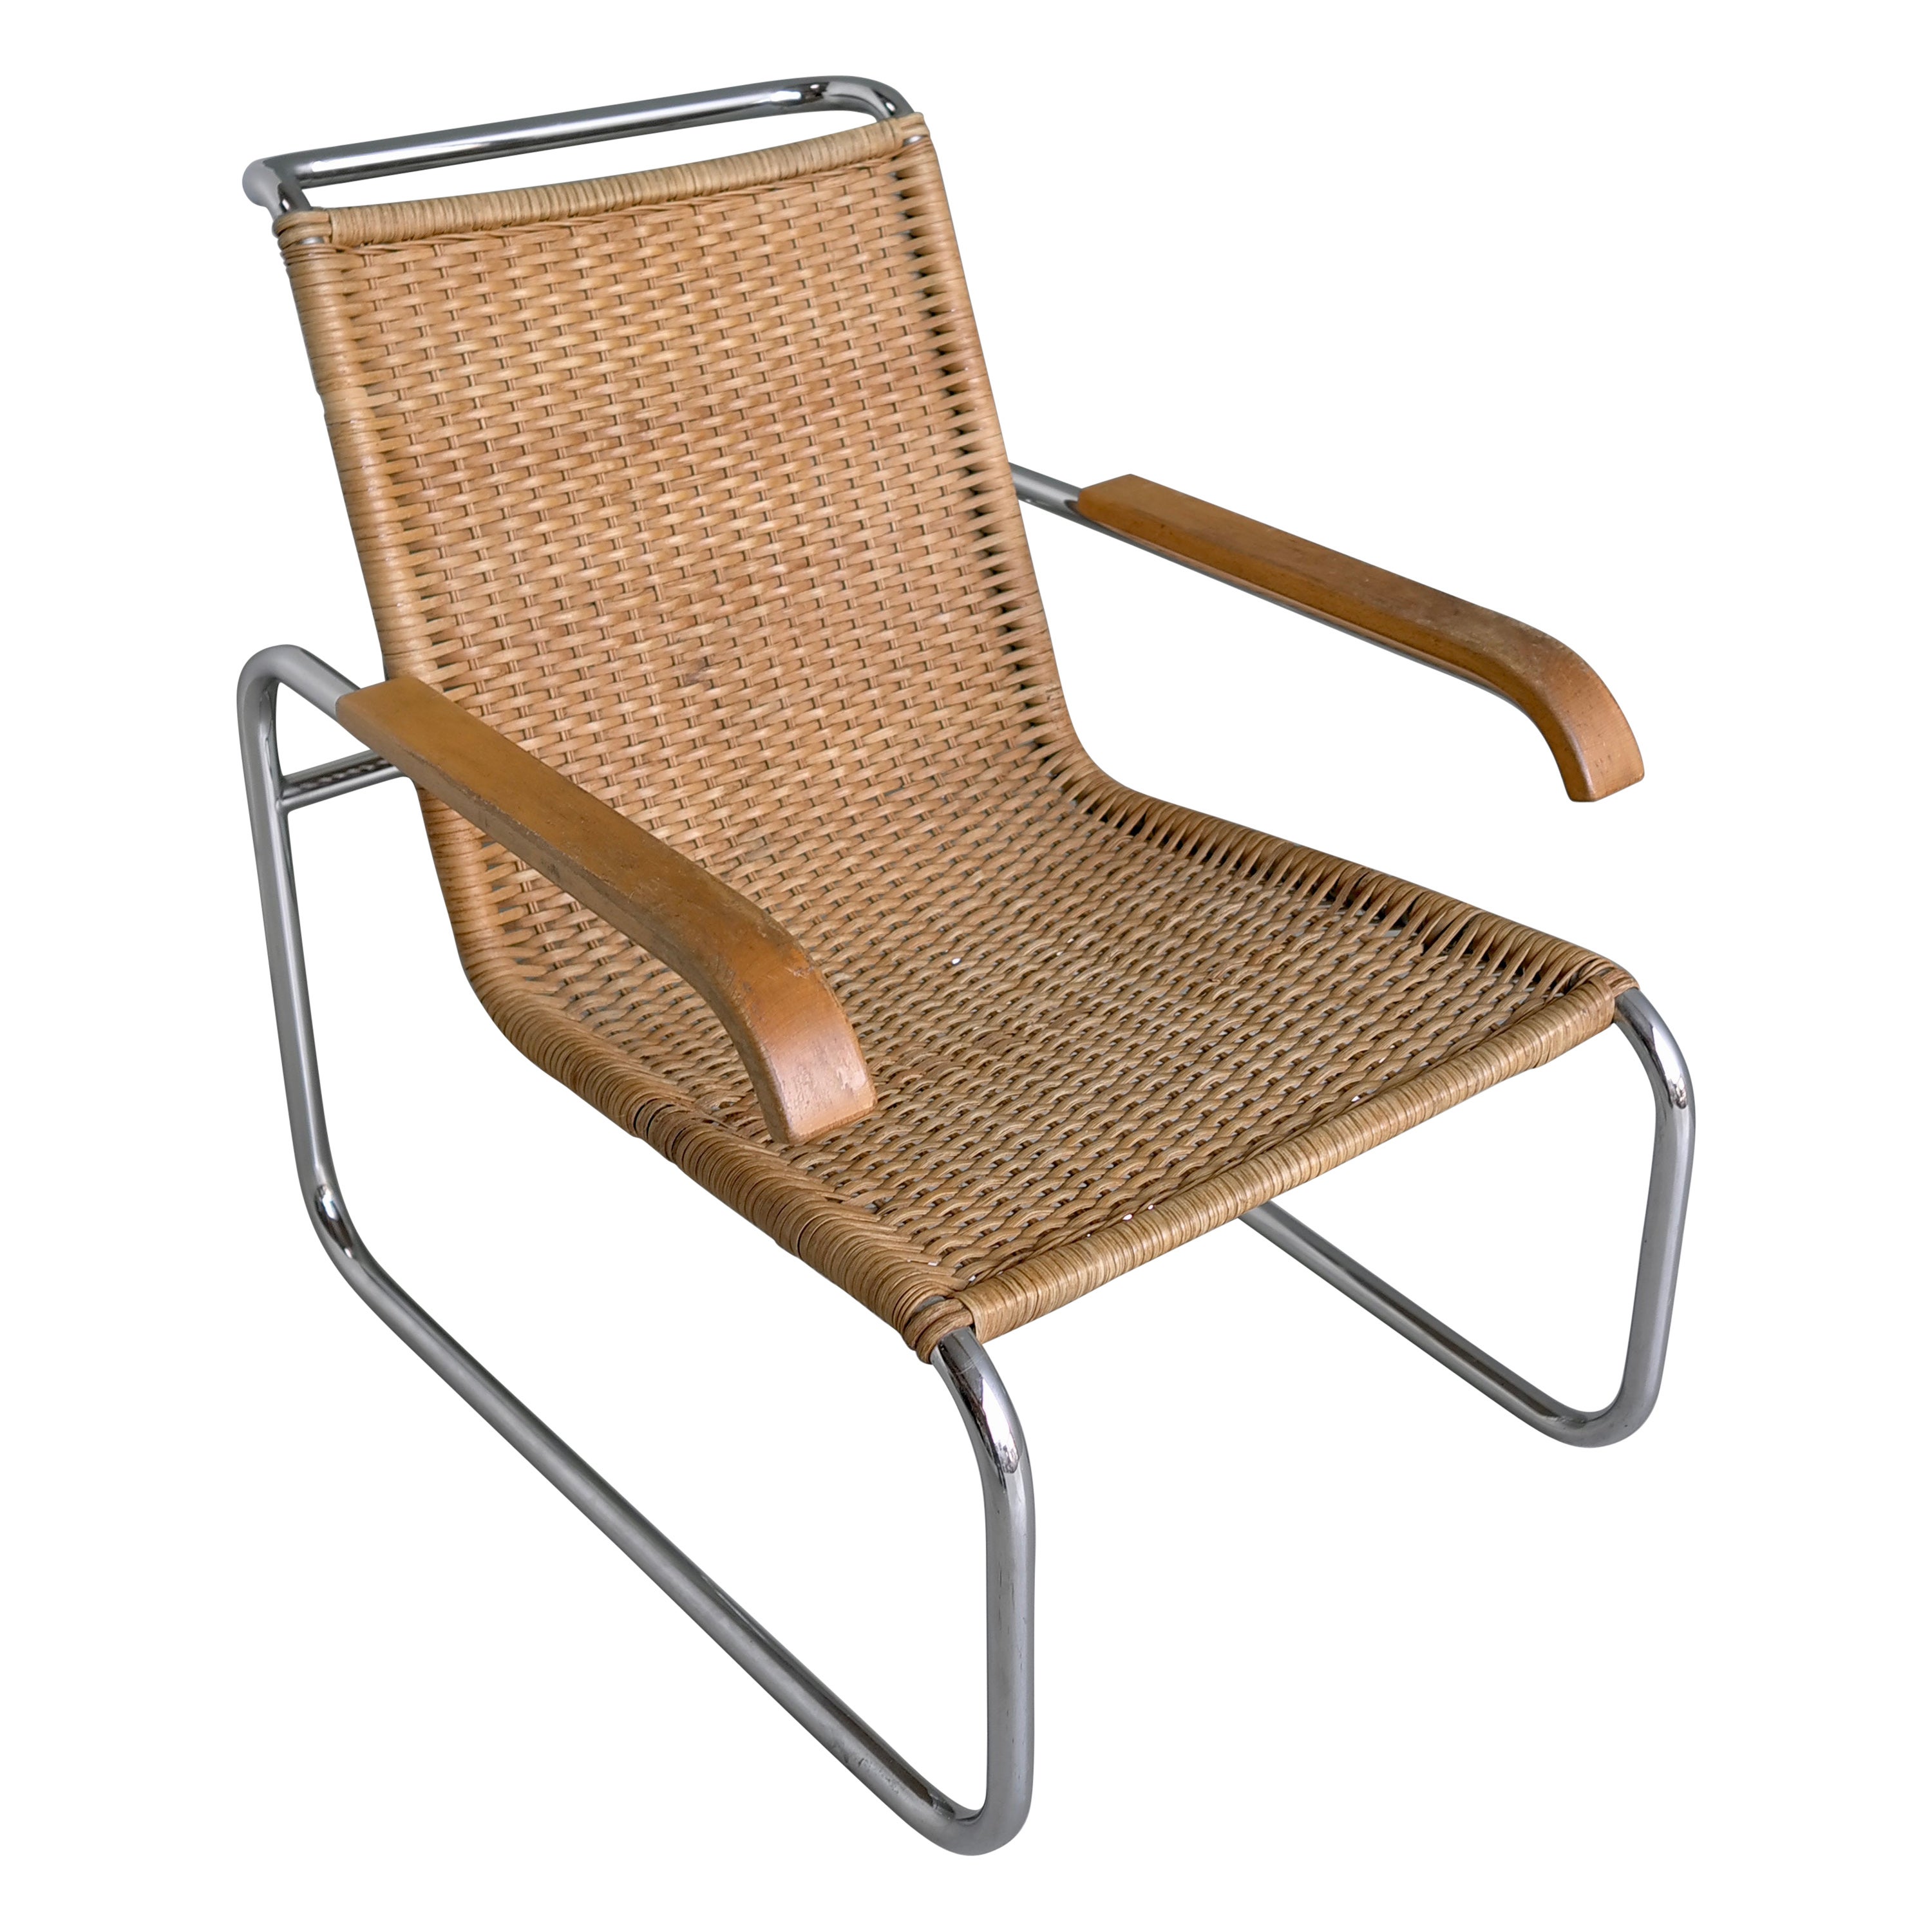 Marcel Breuer B35 Wicker and Chrome Armchair by Thonet 1960's